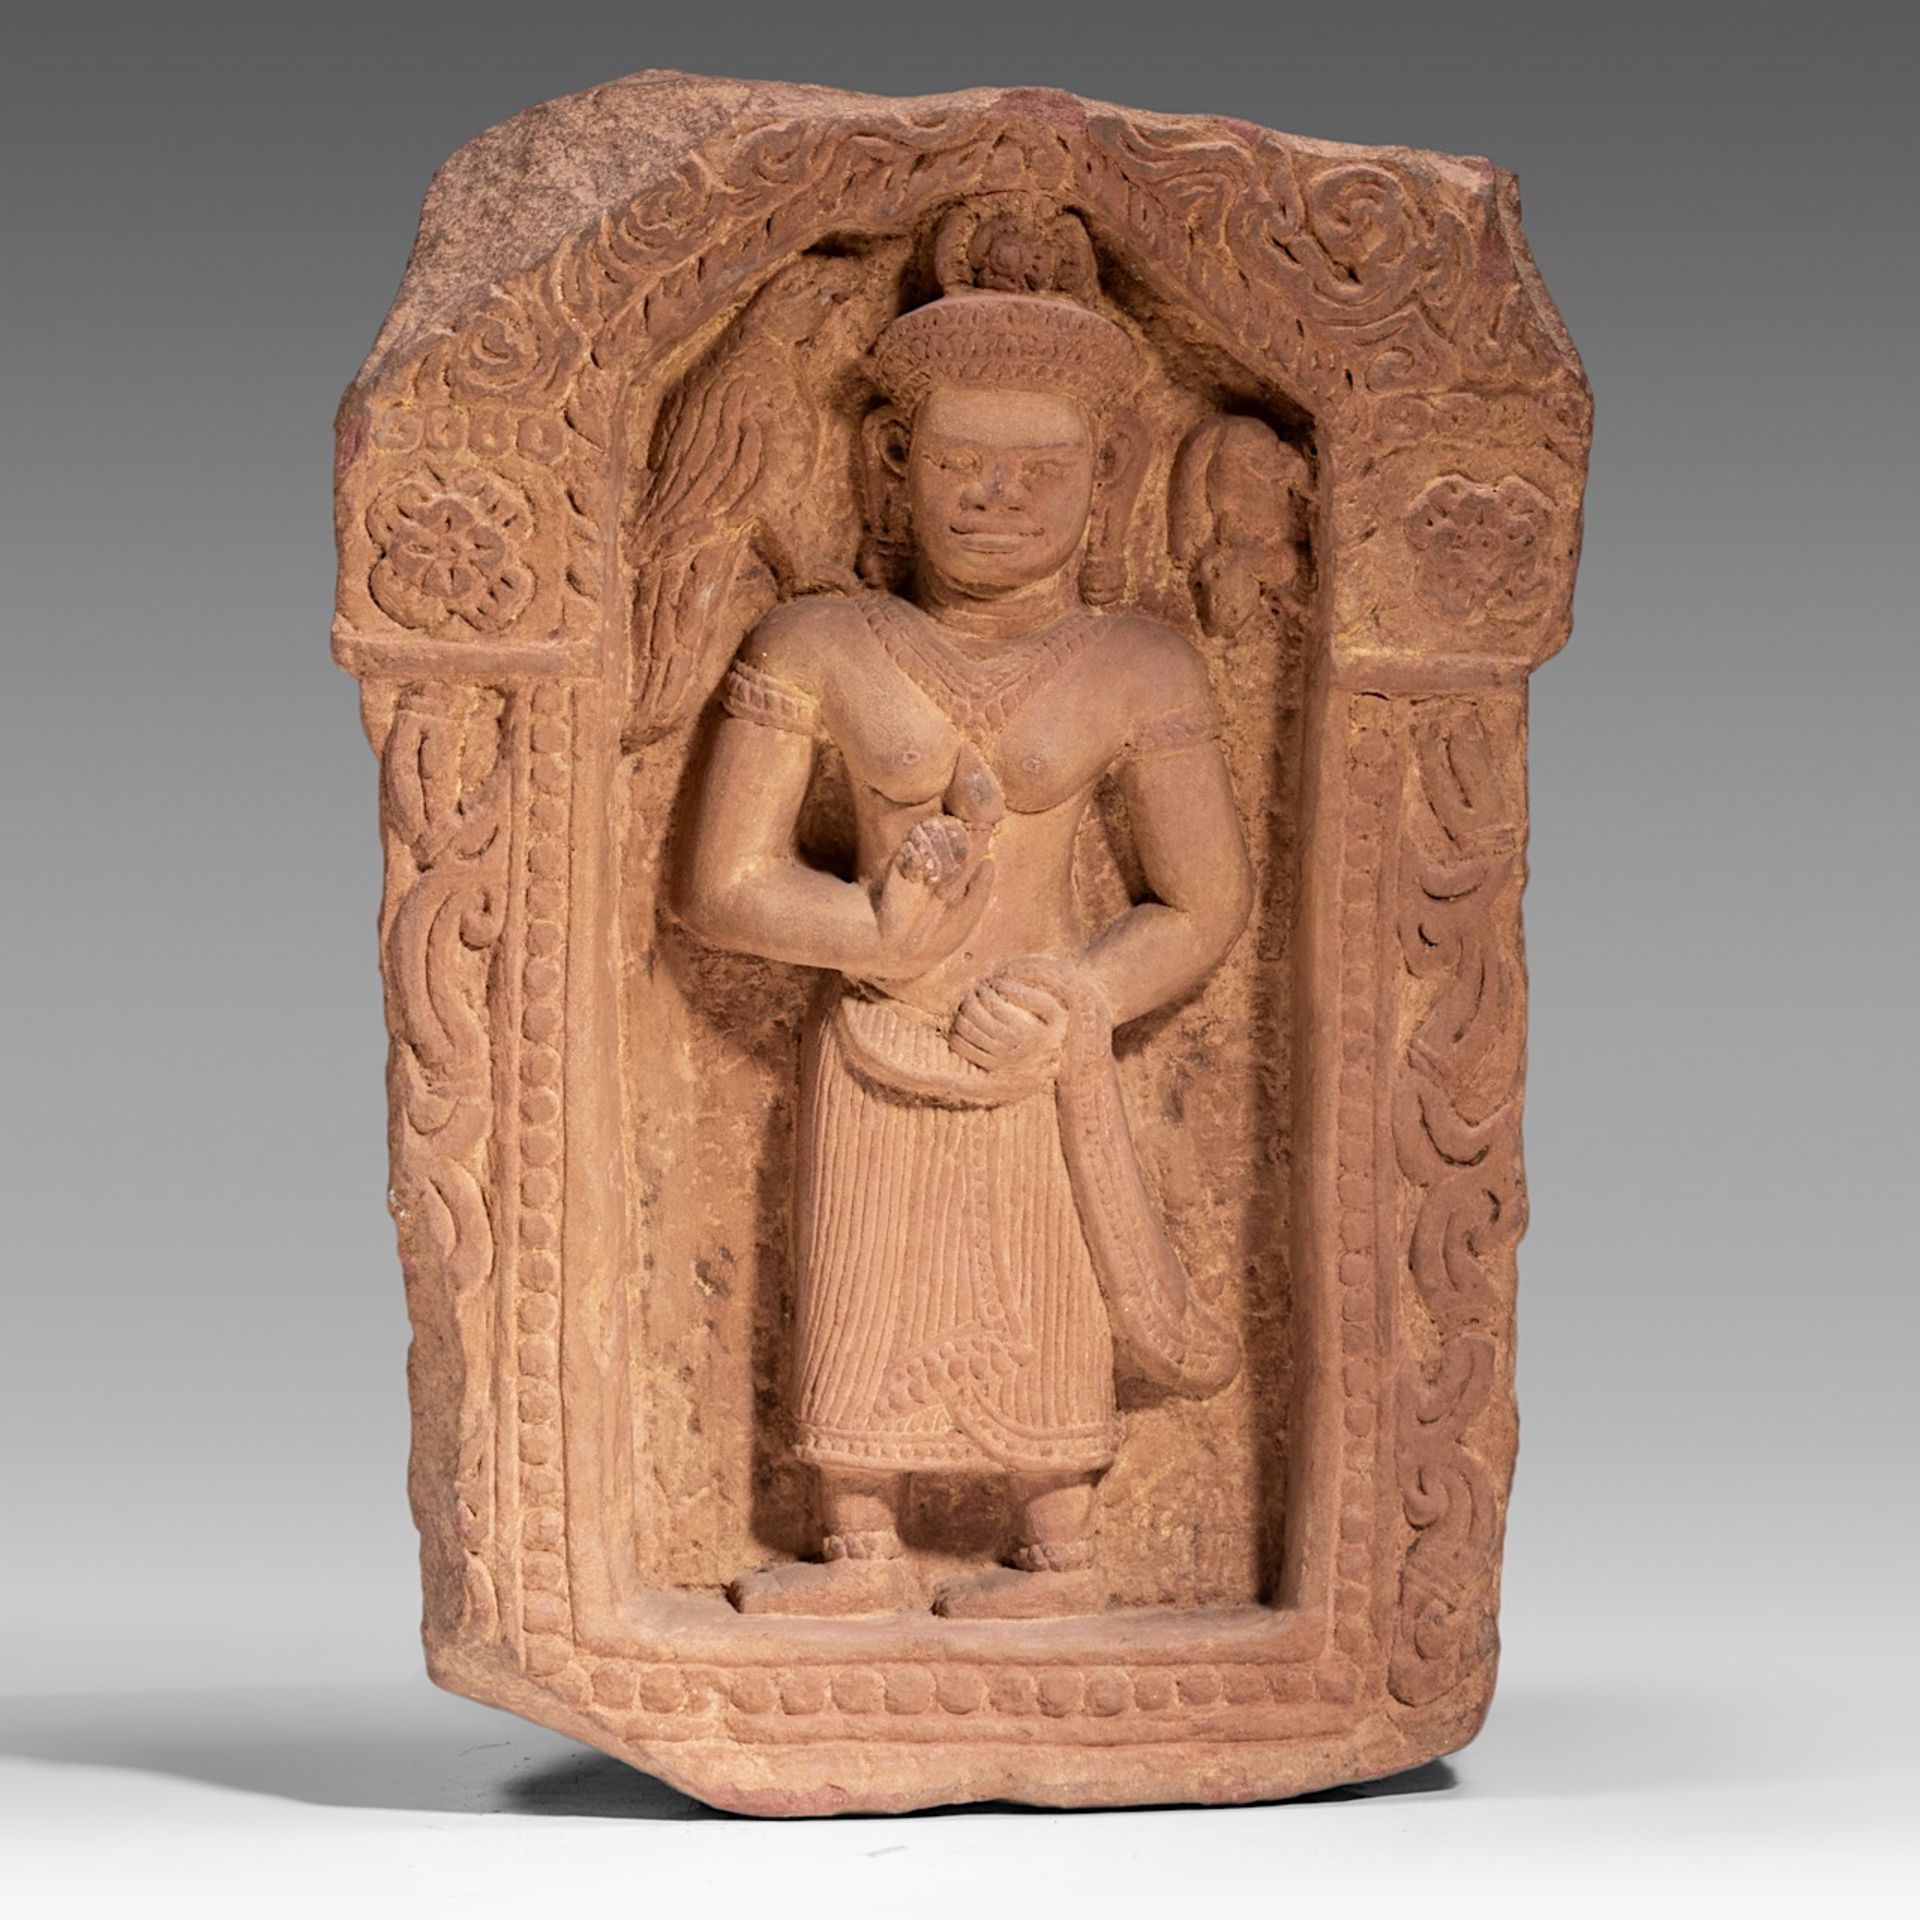 A sandstone fragment depicting a divinity, Khmer, presumably Bayon style, H 62 - W 45 cm - Image 2 of 5